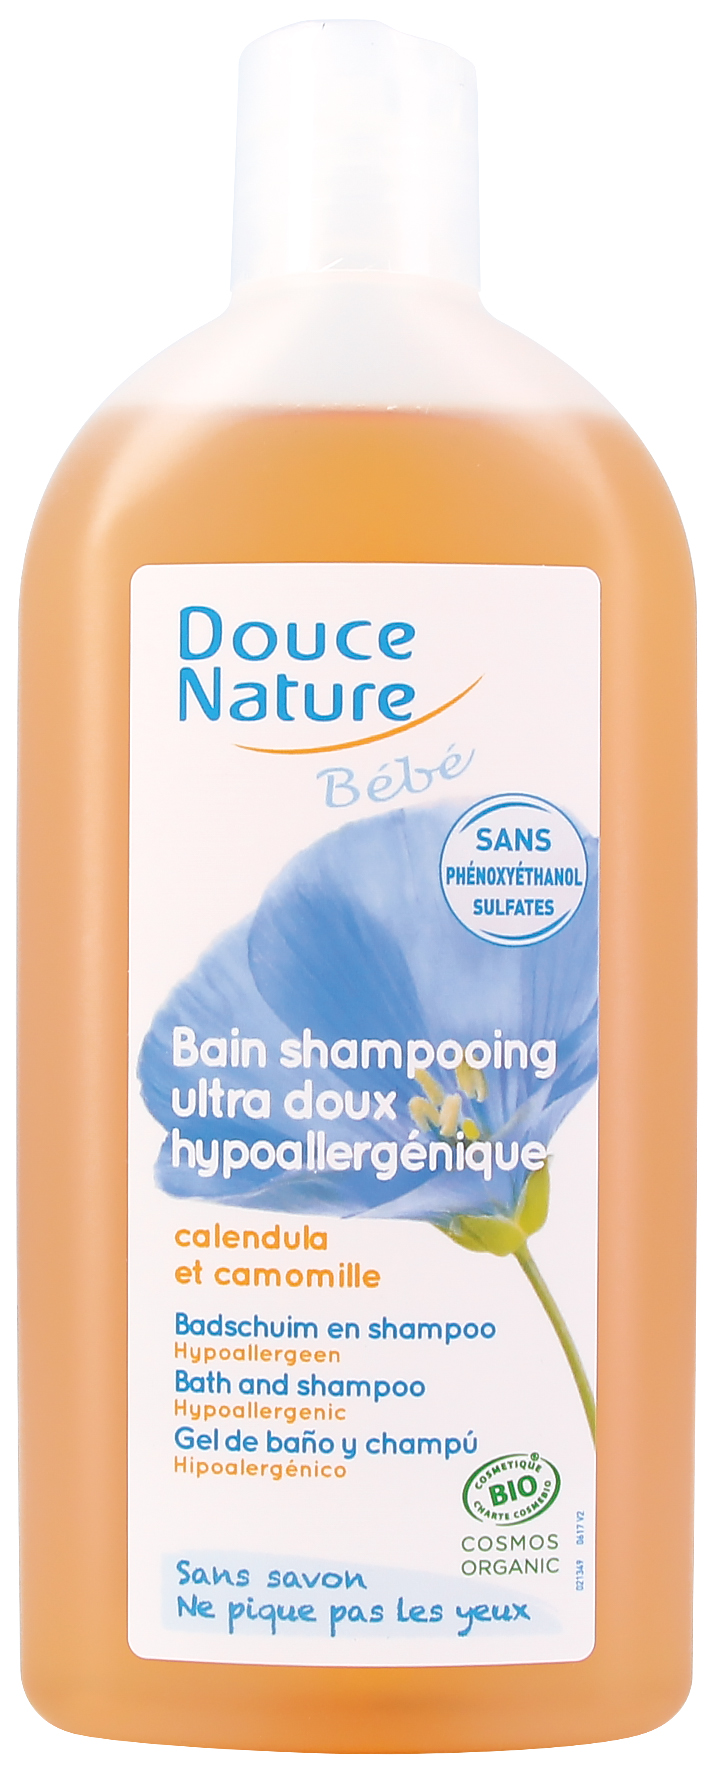 Douce Nature Bath and shampoo for Baby (300ml)